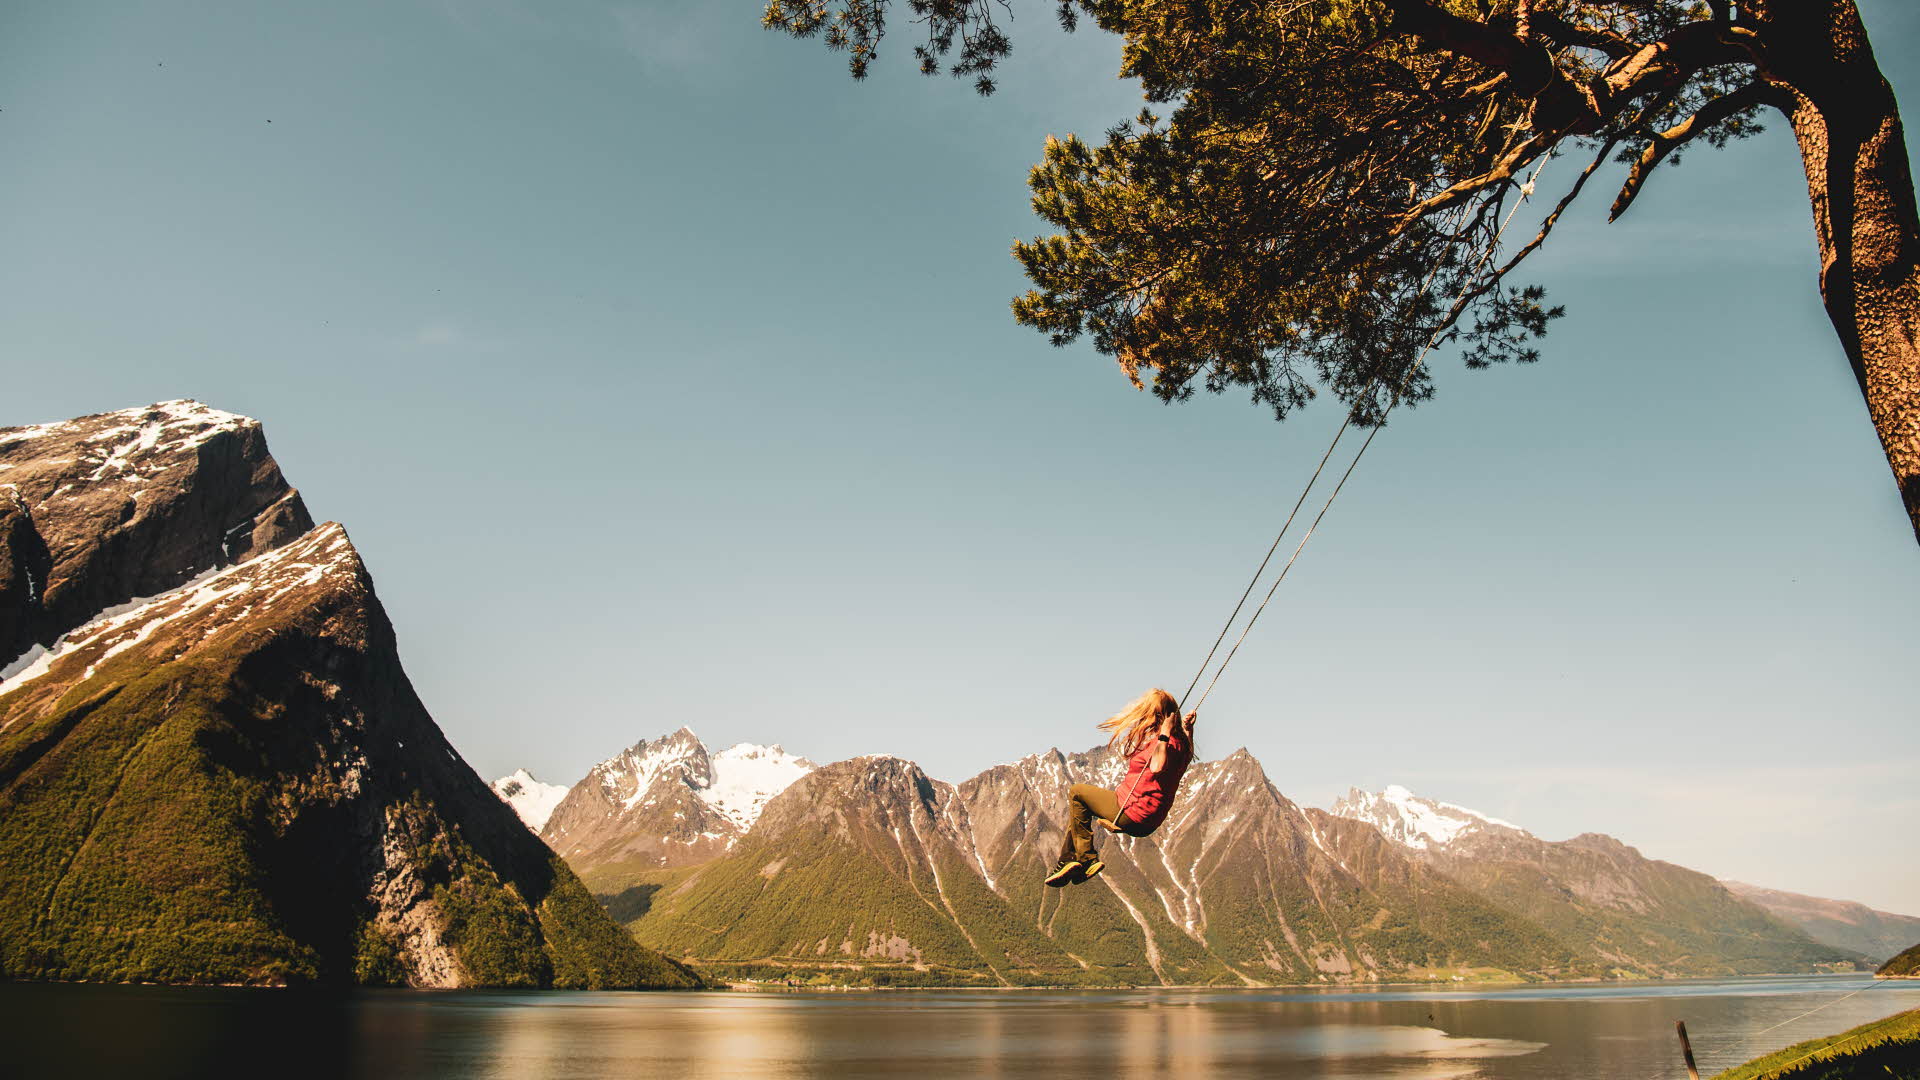 Woman enjoying tree-swing at Trandal farm by Hjorundfjord. Dramatic alpine mountains with snow-capped mountains